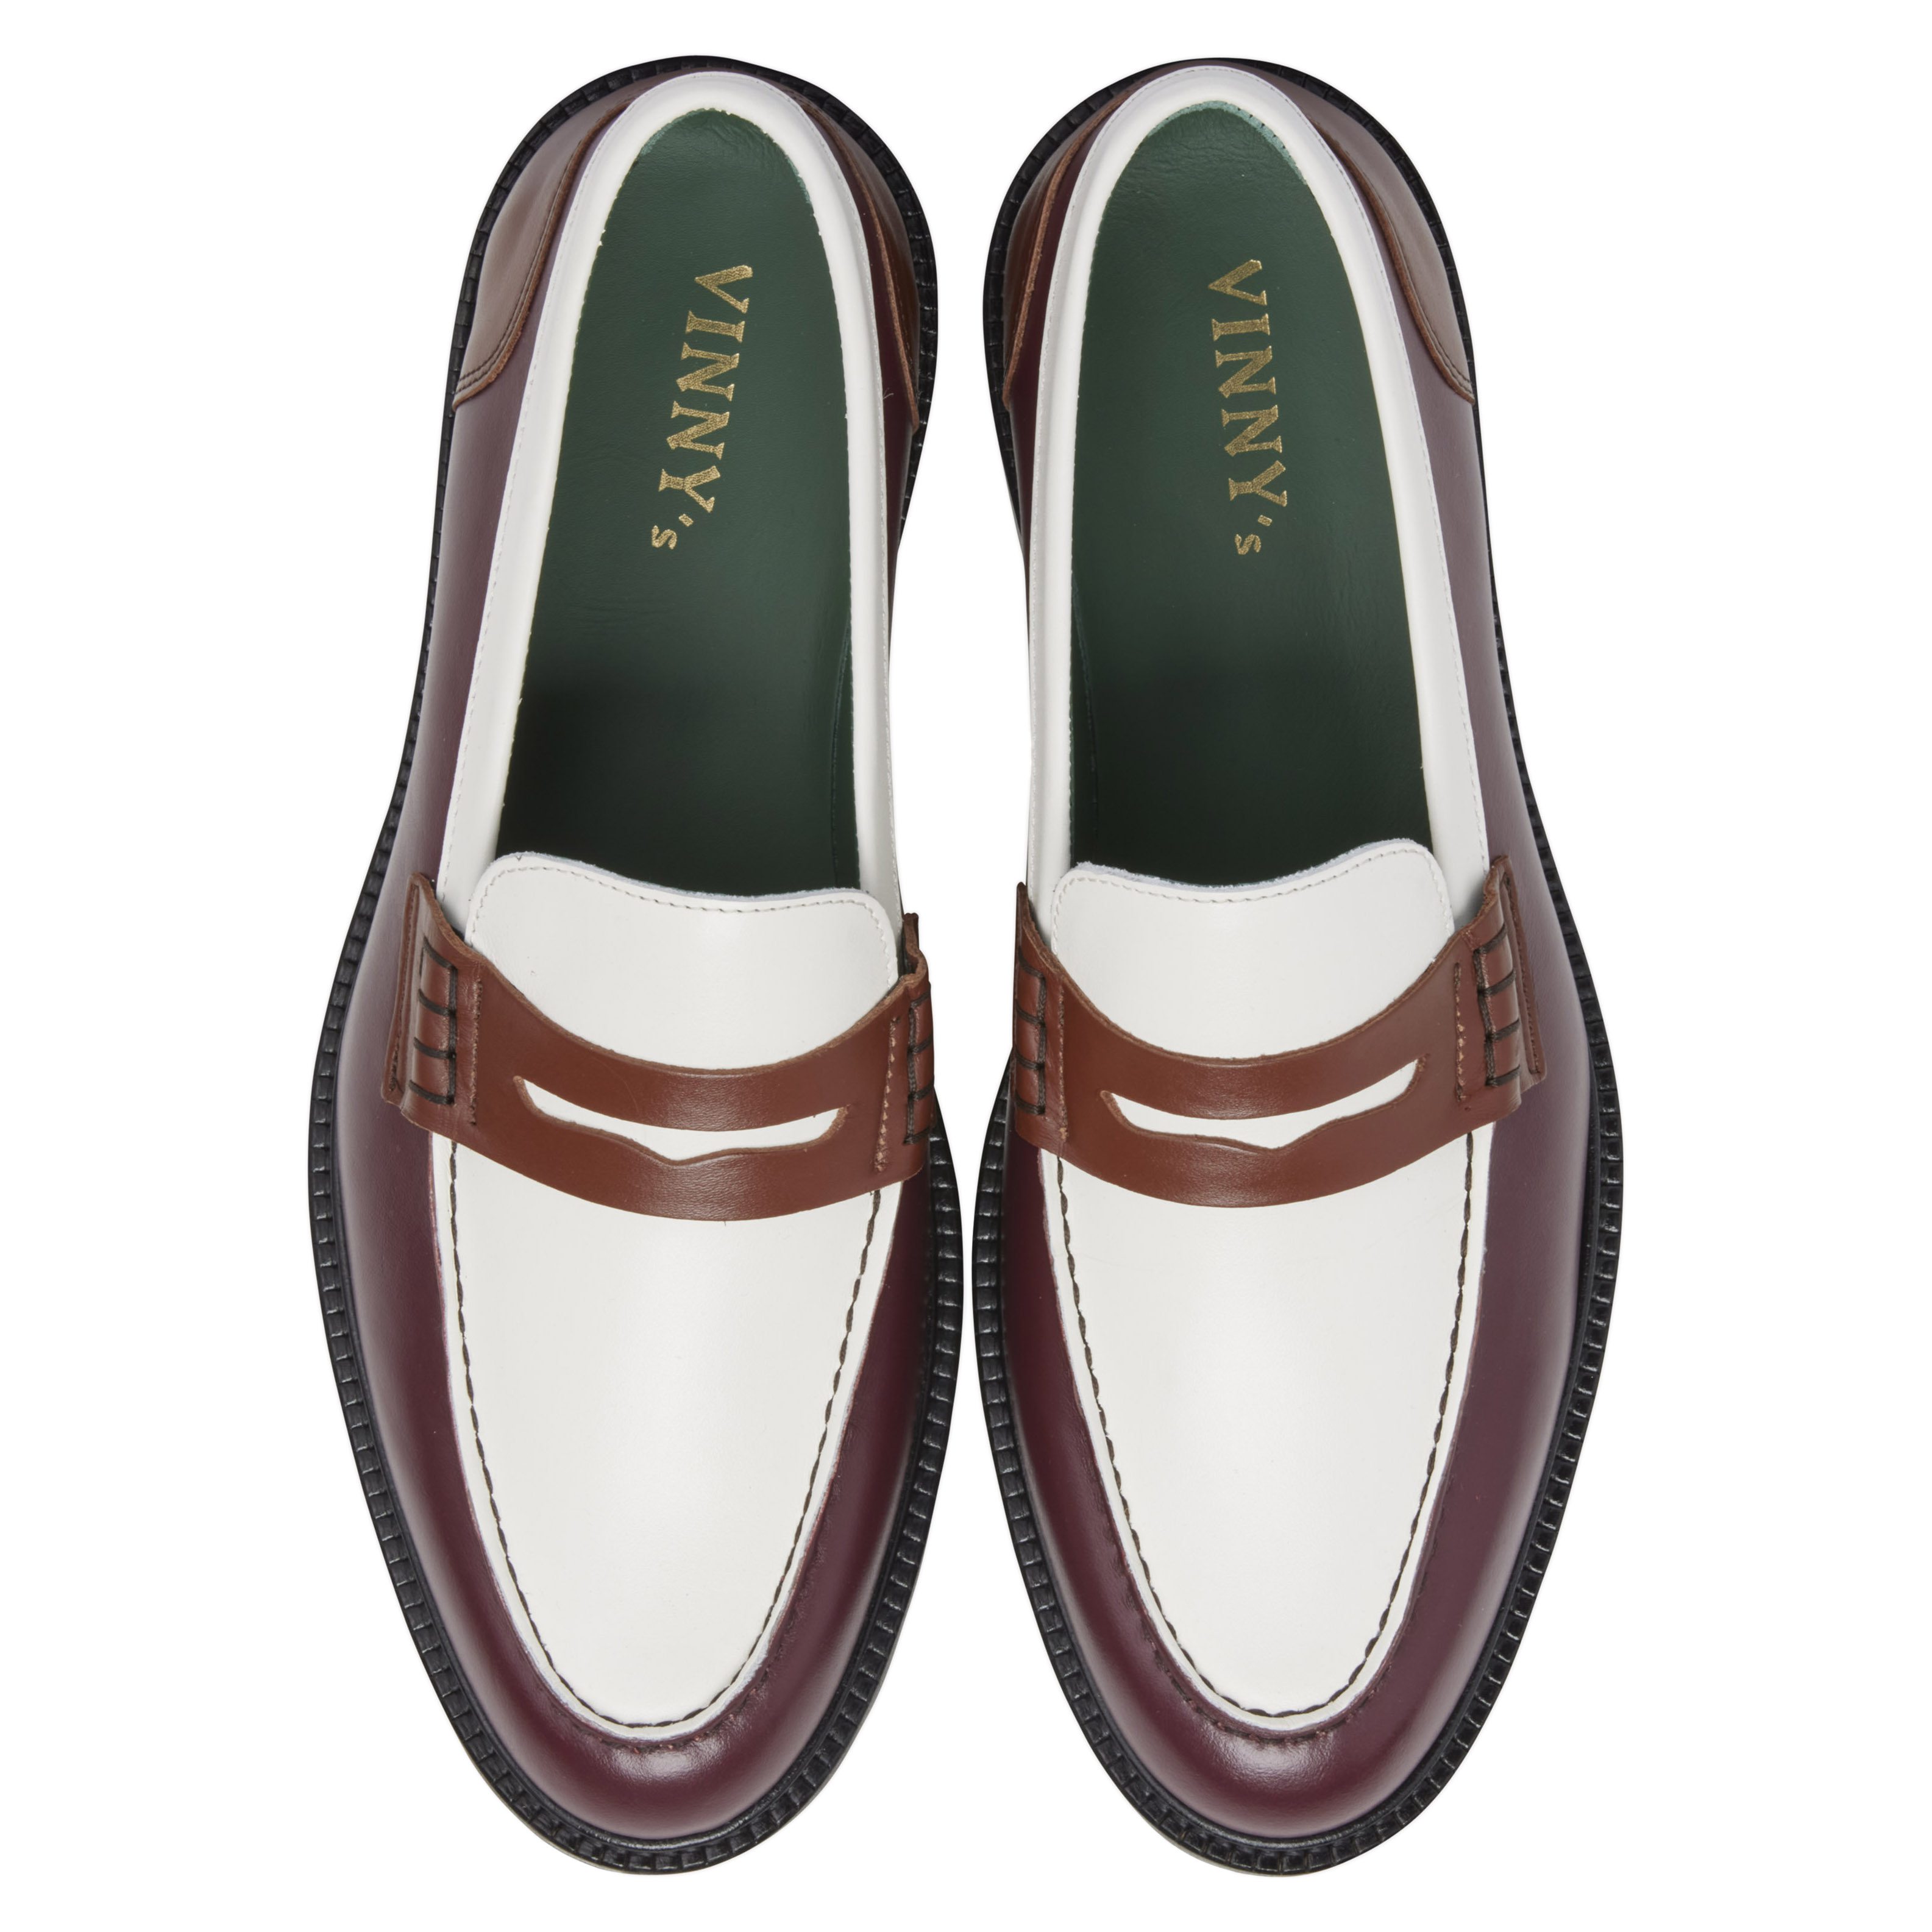 Vinny's Townee Penny Loafer - Burgundy / Brown / Off White Crust 